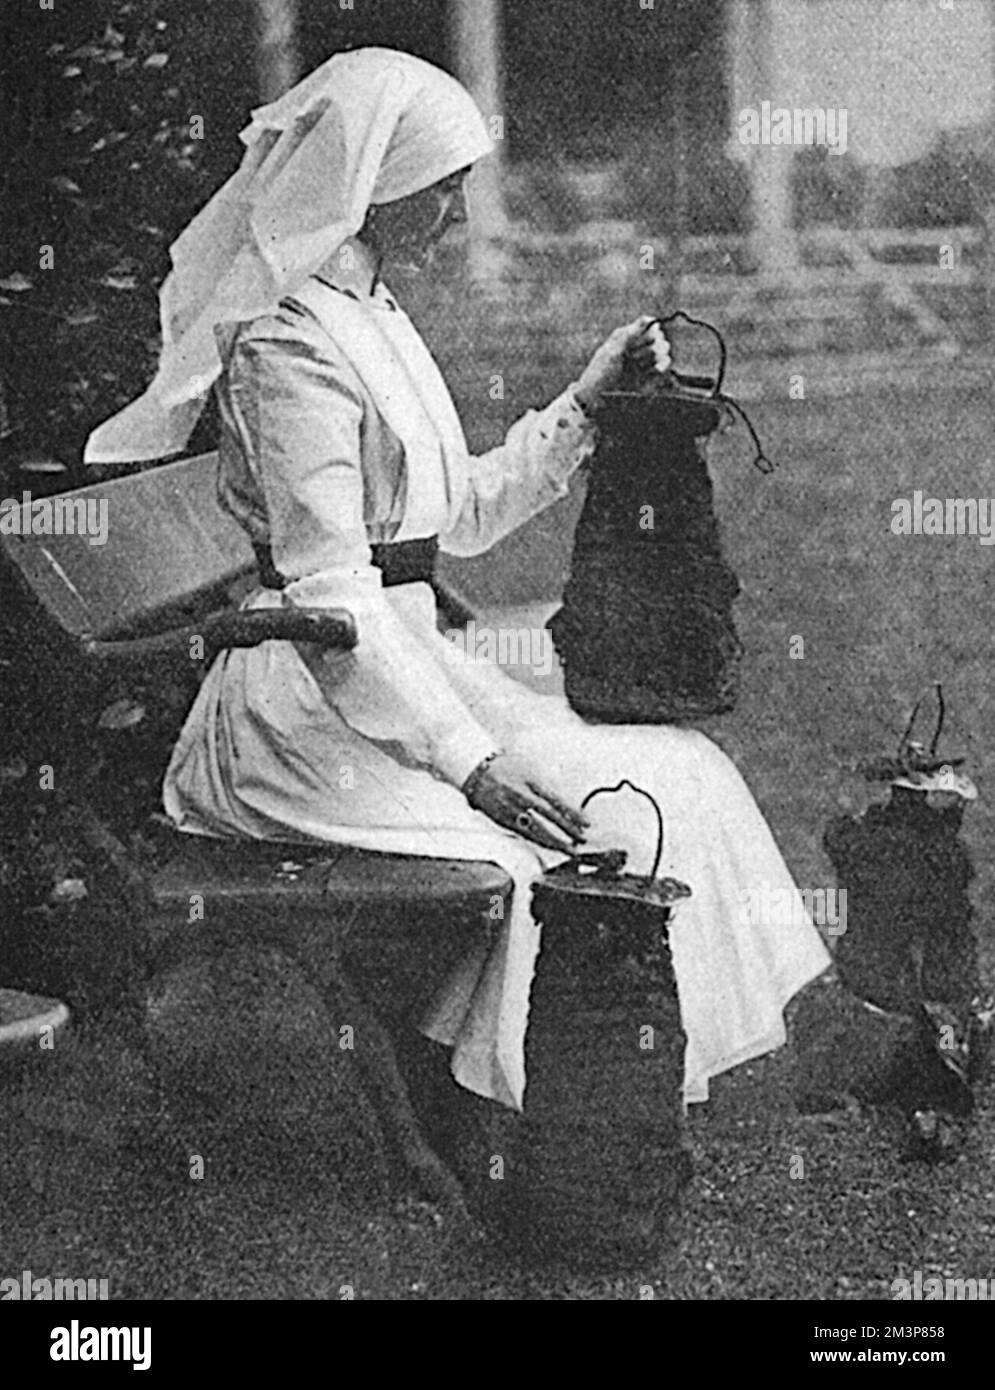 Lady Stradbroke, formerly Helena Fraser and wife of George Rous, 3rd Earl of Stradbroke, pictured in nurse's uniform at the family home of Henham Hall in Suffolk contemplating the bombs dropped by German aircraft in April 1915. The house was converted into a military hospital during the First World War and received convoys of wounded soldiers directly from France, who were passed on to the Red Cross once sufficiently well. Lady Stradbroke took sole charge as matron and efficiently superintended the hospital. Henham Hall was demolished in 1953.      Date: 1915 Stock Photo